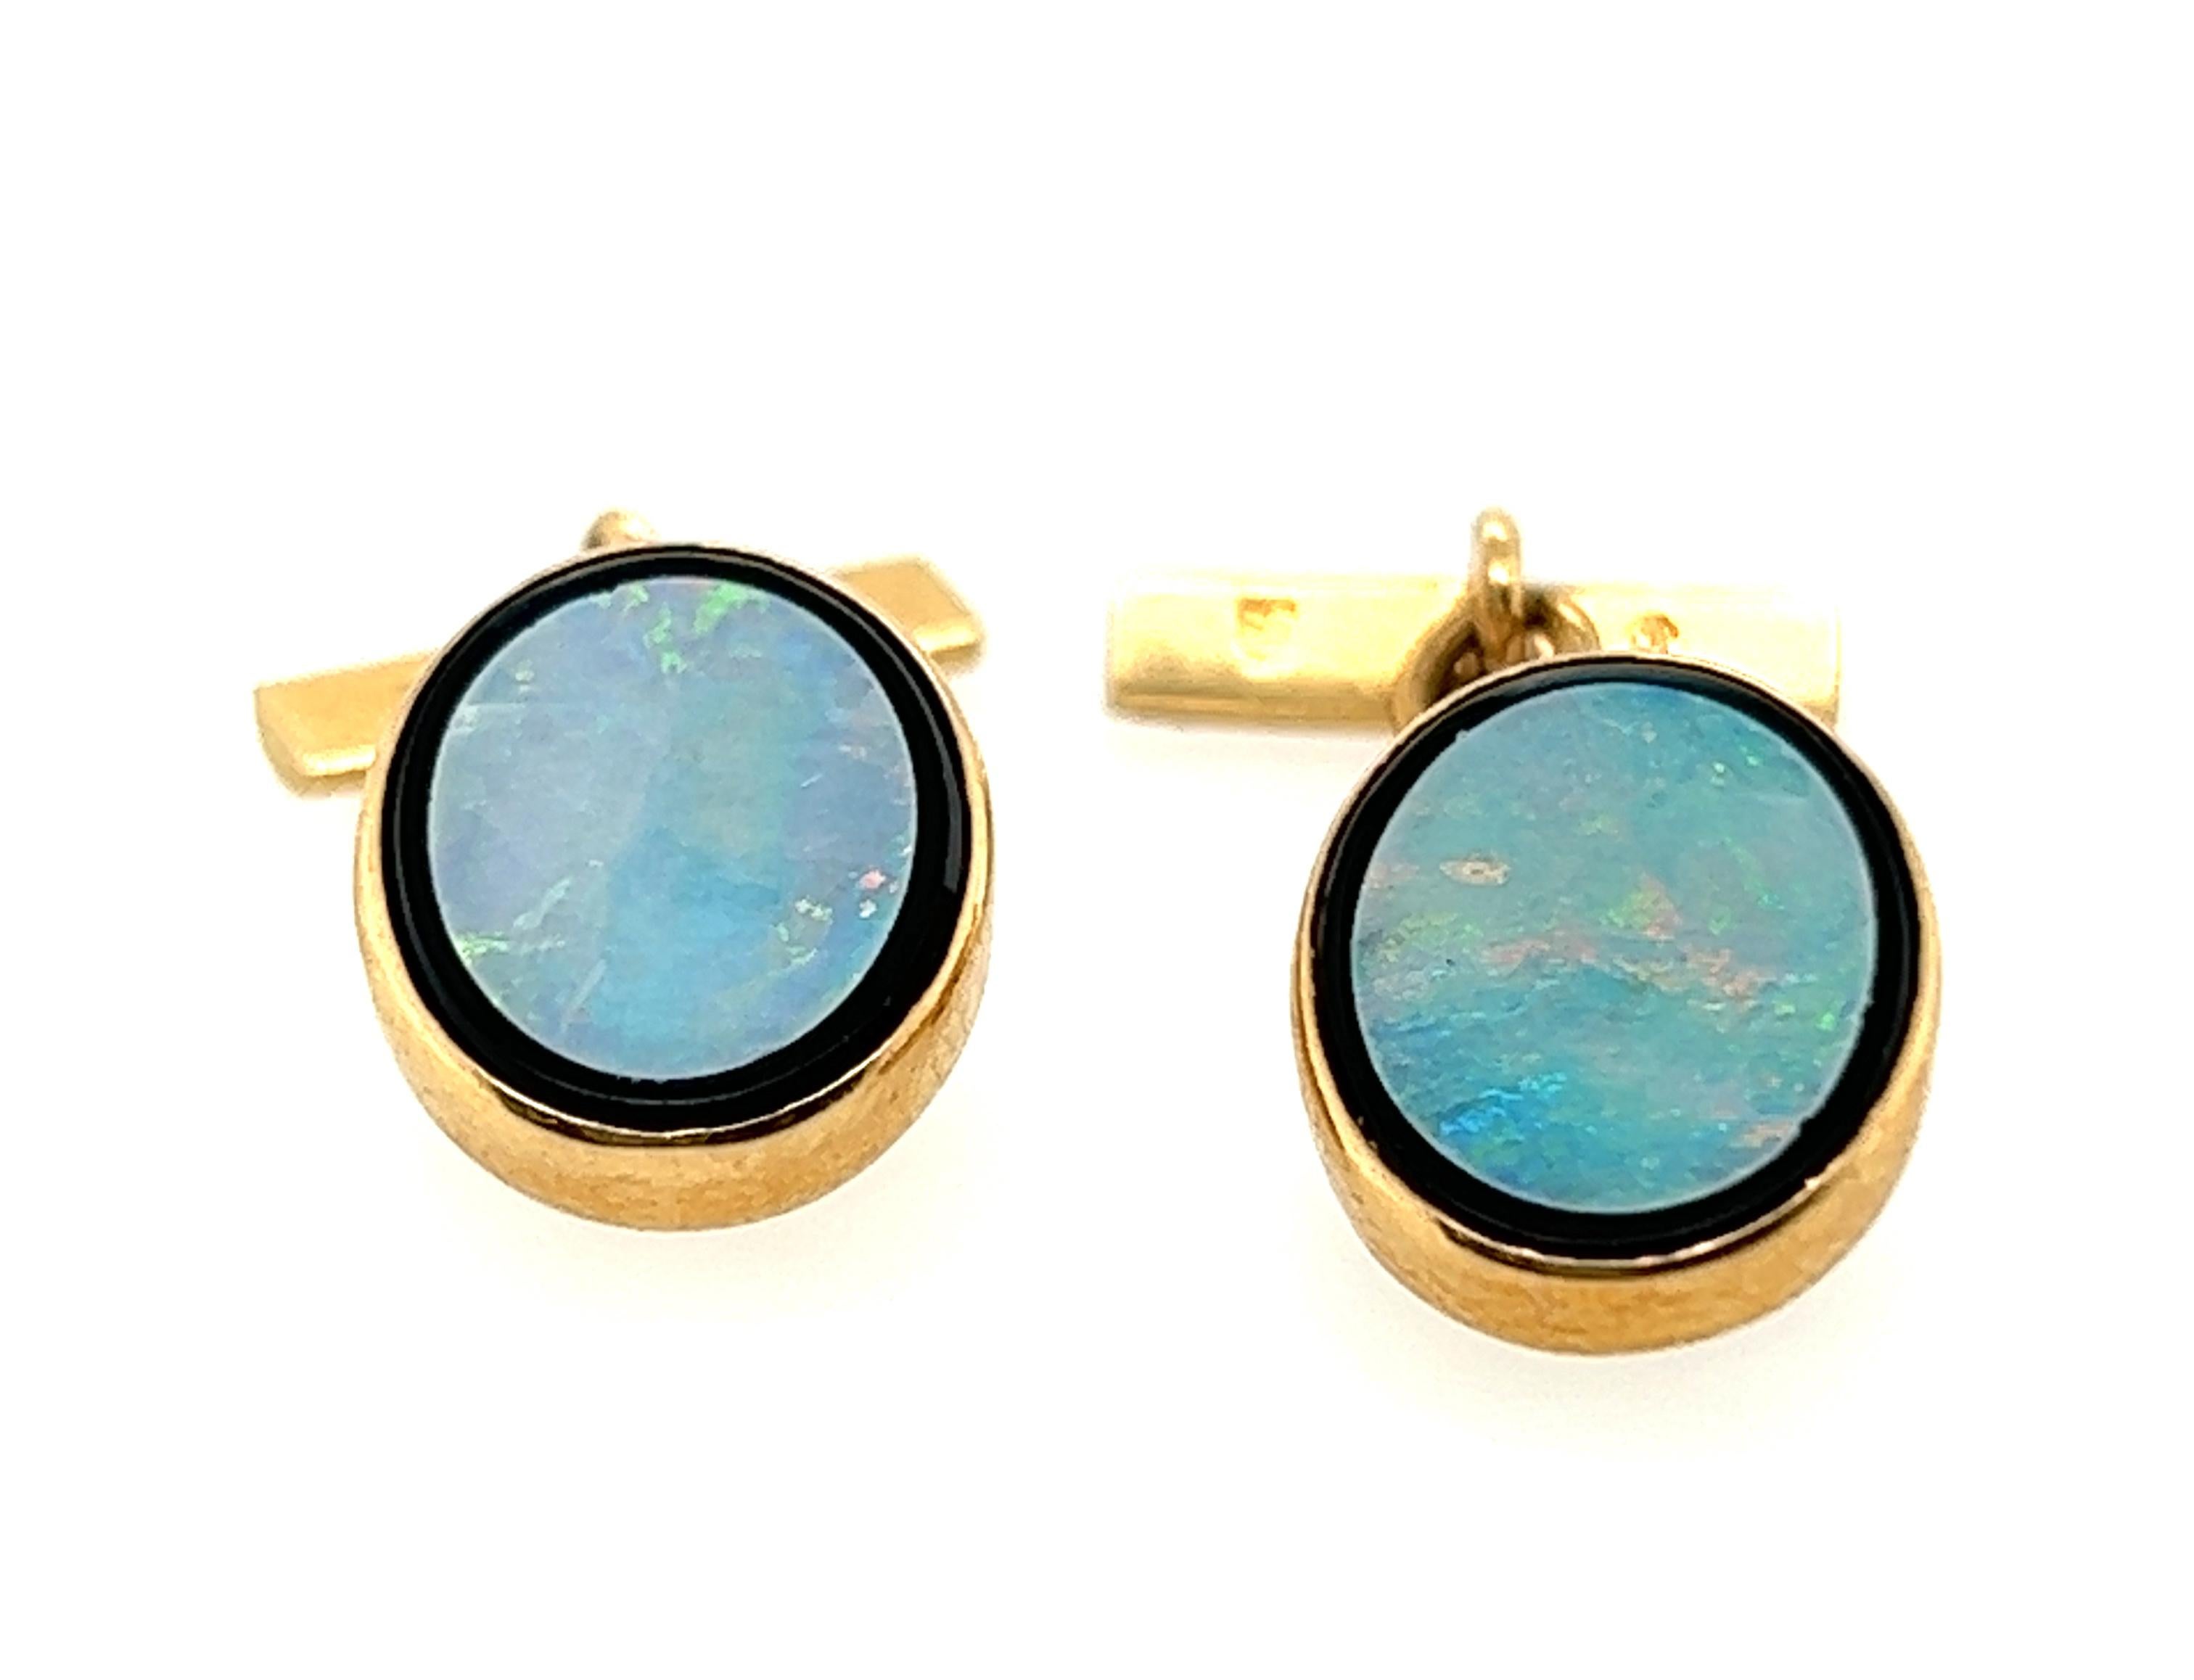 Genuine Original Antique from 1930s-1940s Art Deco Mens European Opal Onyx Cufflinks 18K Yellow Gold 


Features Two 10.5 x 8.5mm Oval Cut European Opal Gemstones

Opals are Mounted in Black Onyx Border

These Cufflinks Weigh a Heavy 5.26